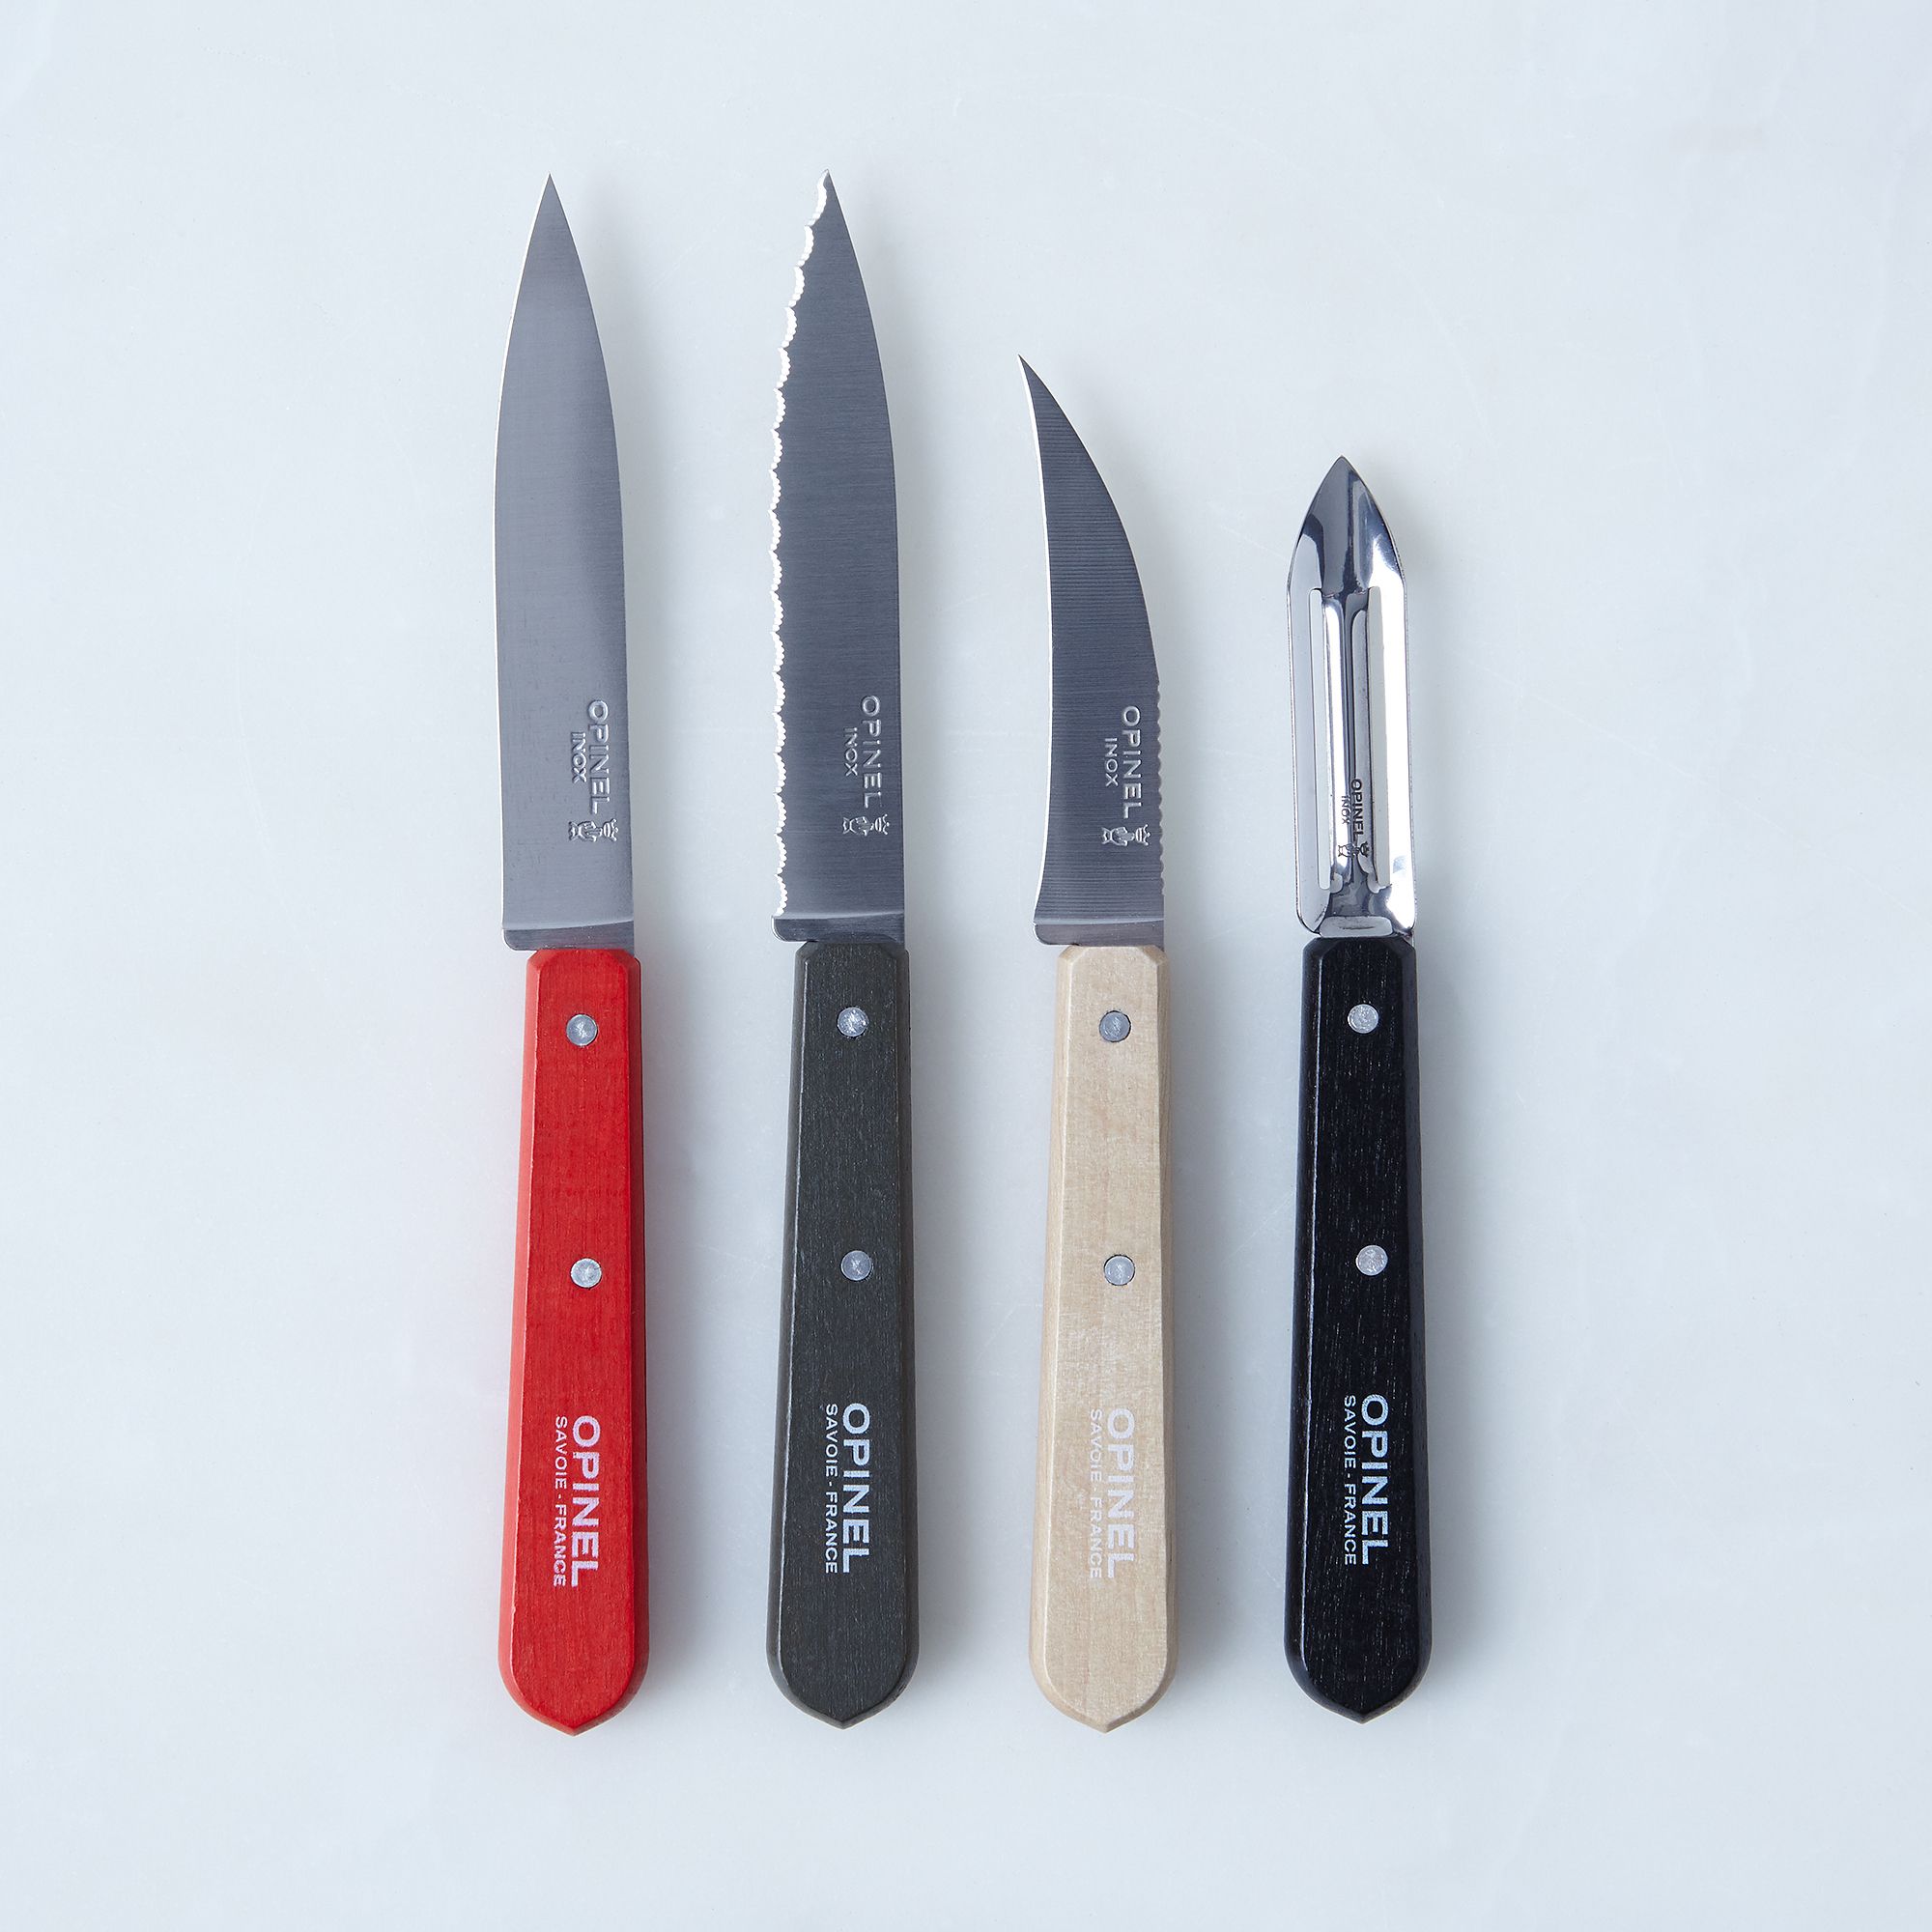 Knives Cutting Boards Kitchen Food52 Shop